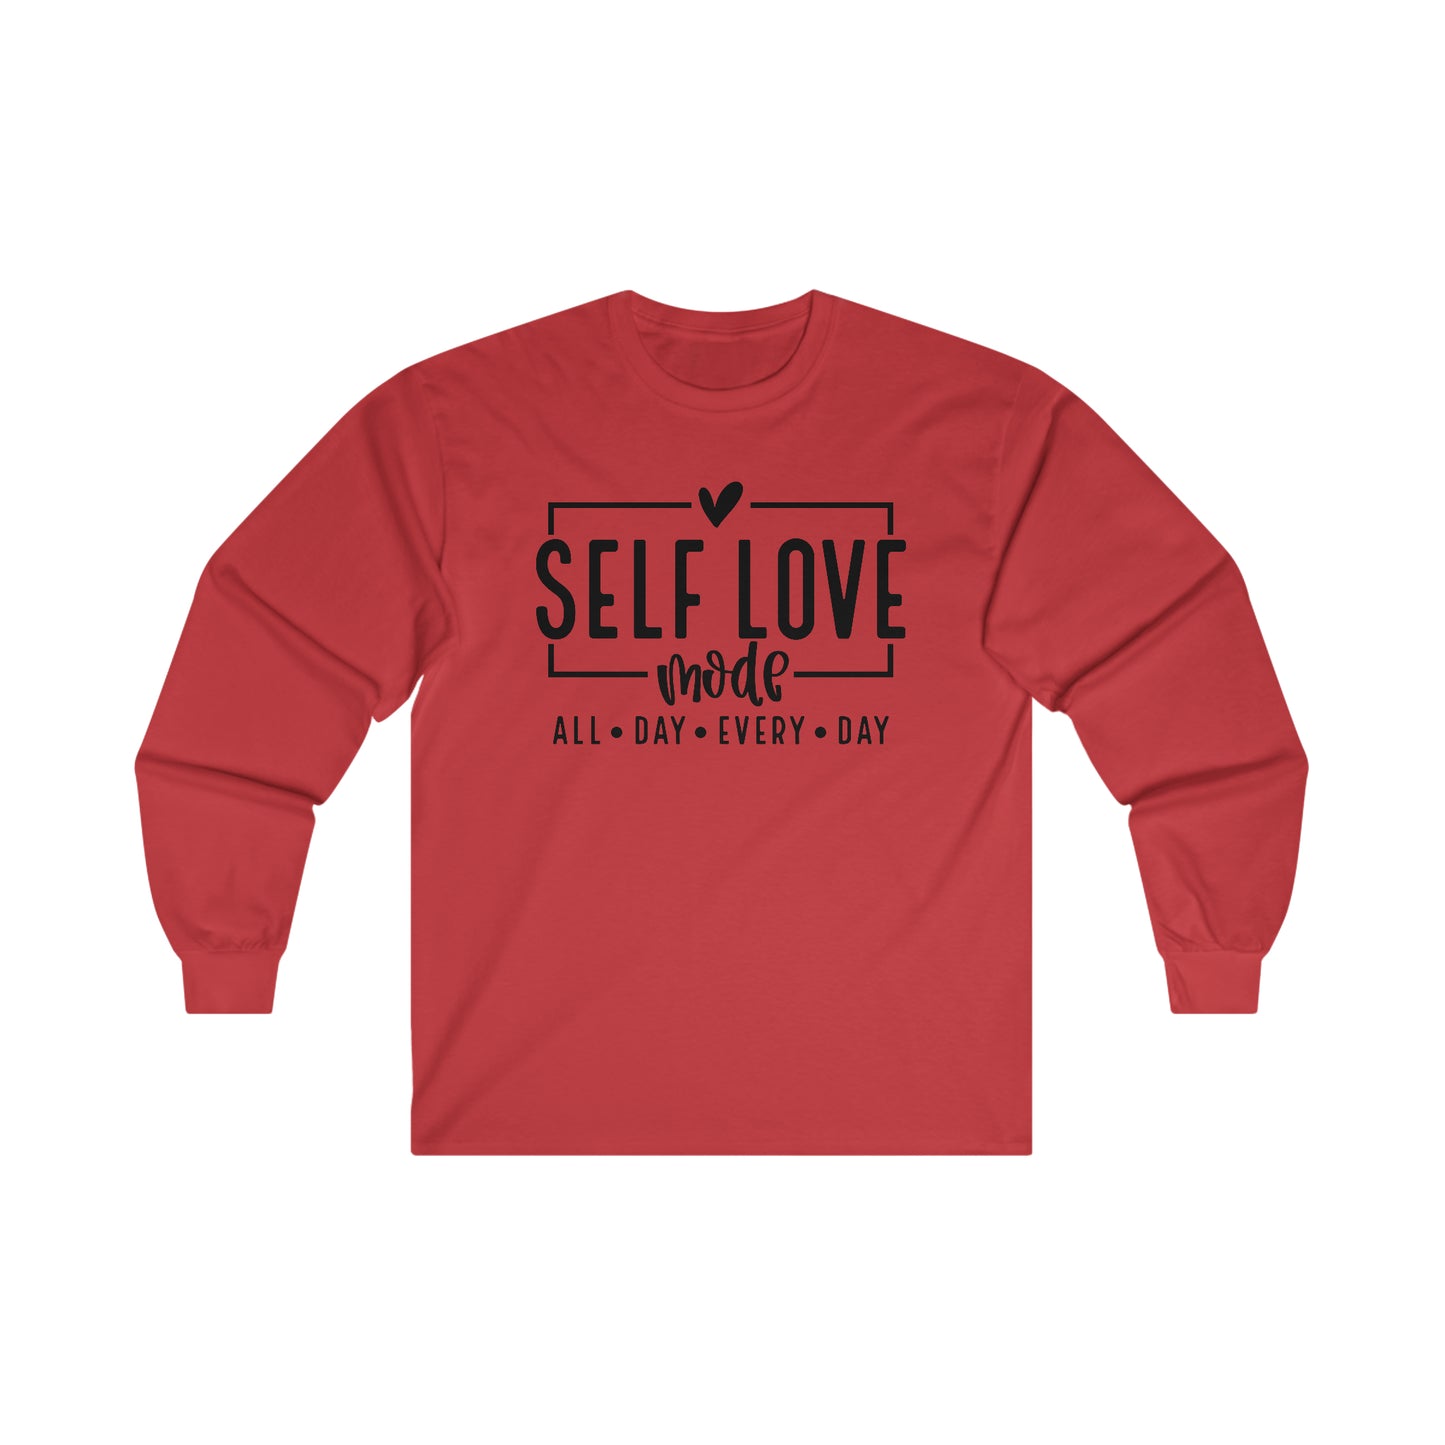 Self Love Mode - All Day Every Day - Heart - Ultra Cotton Long Sleeve Tee